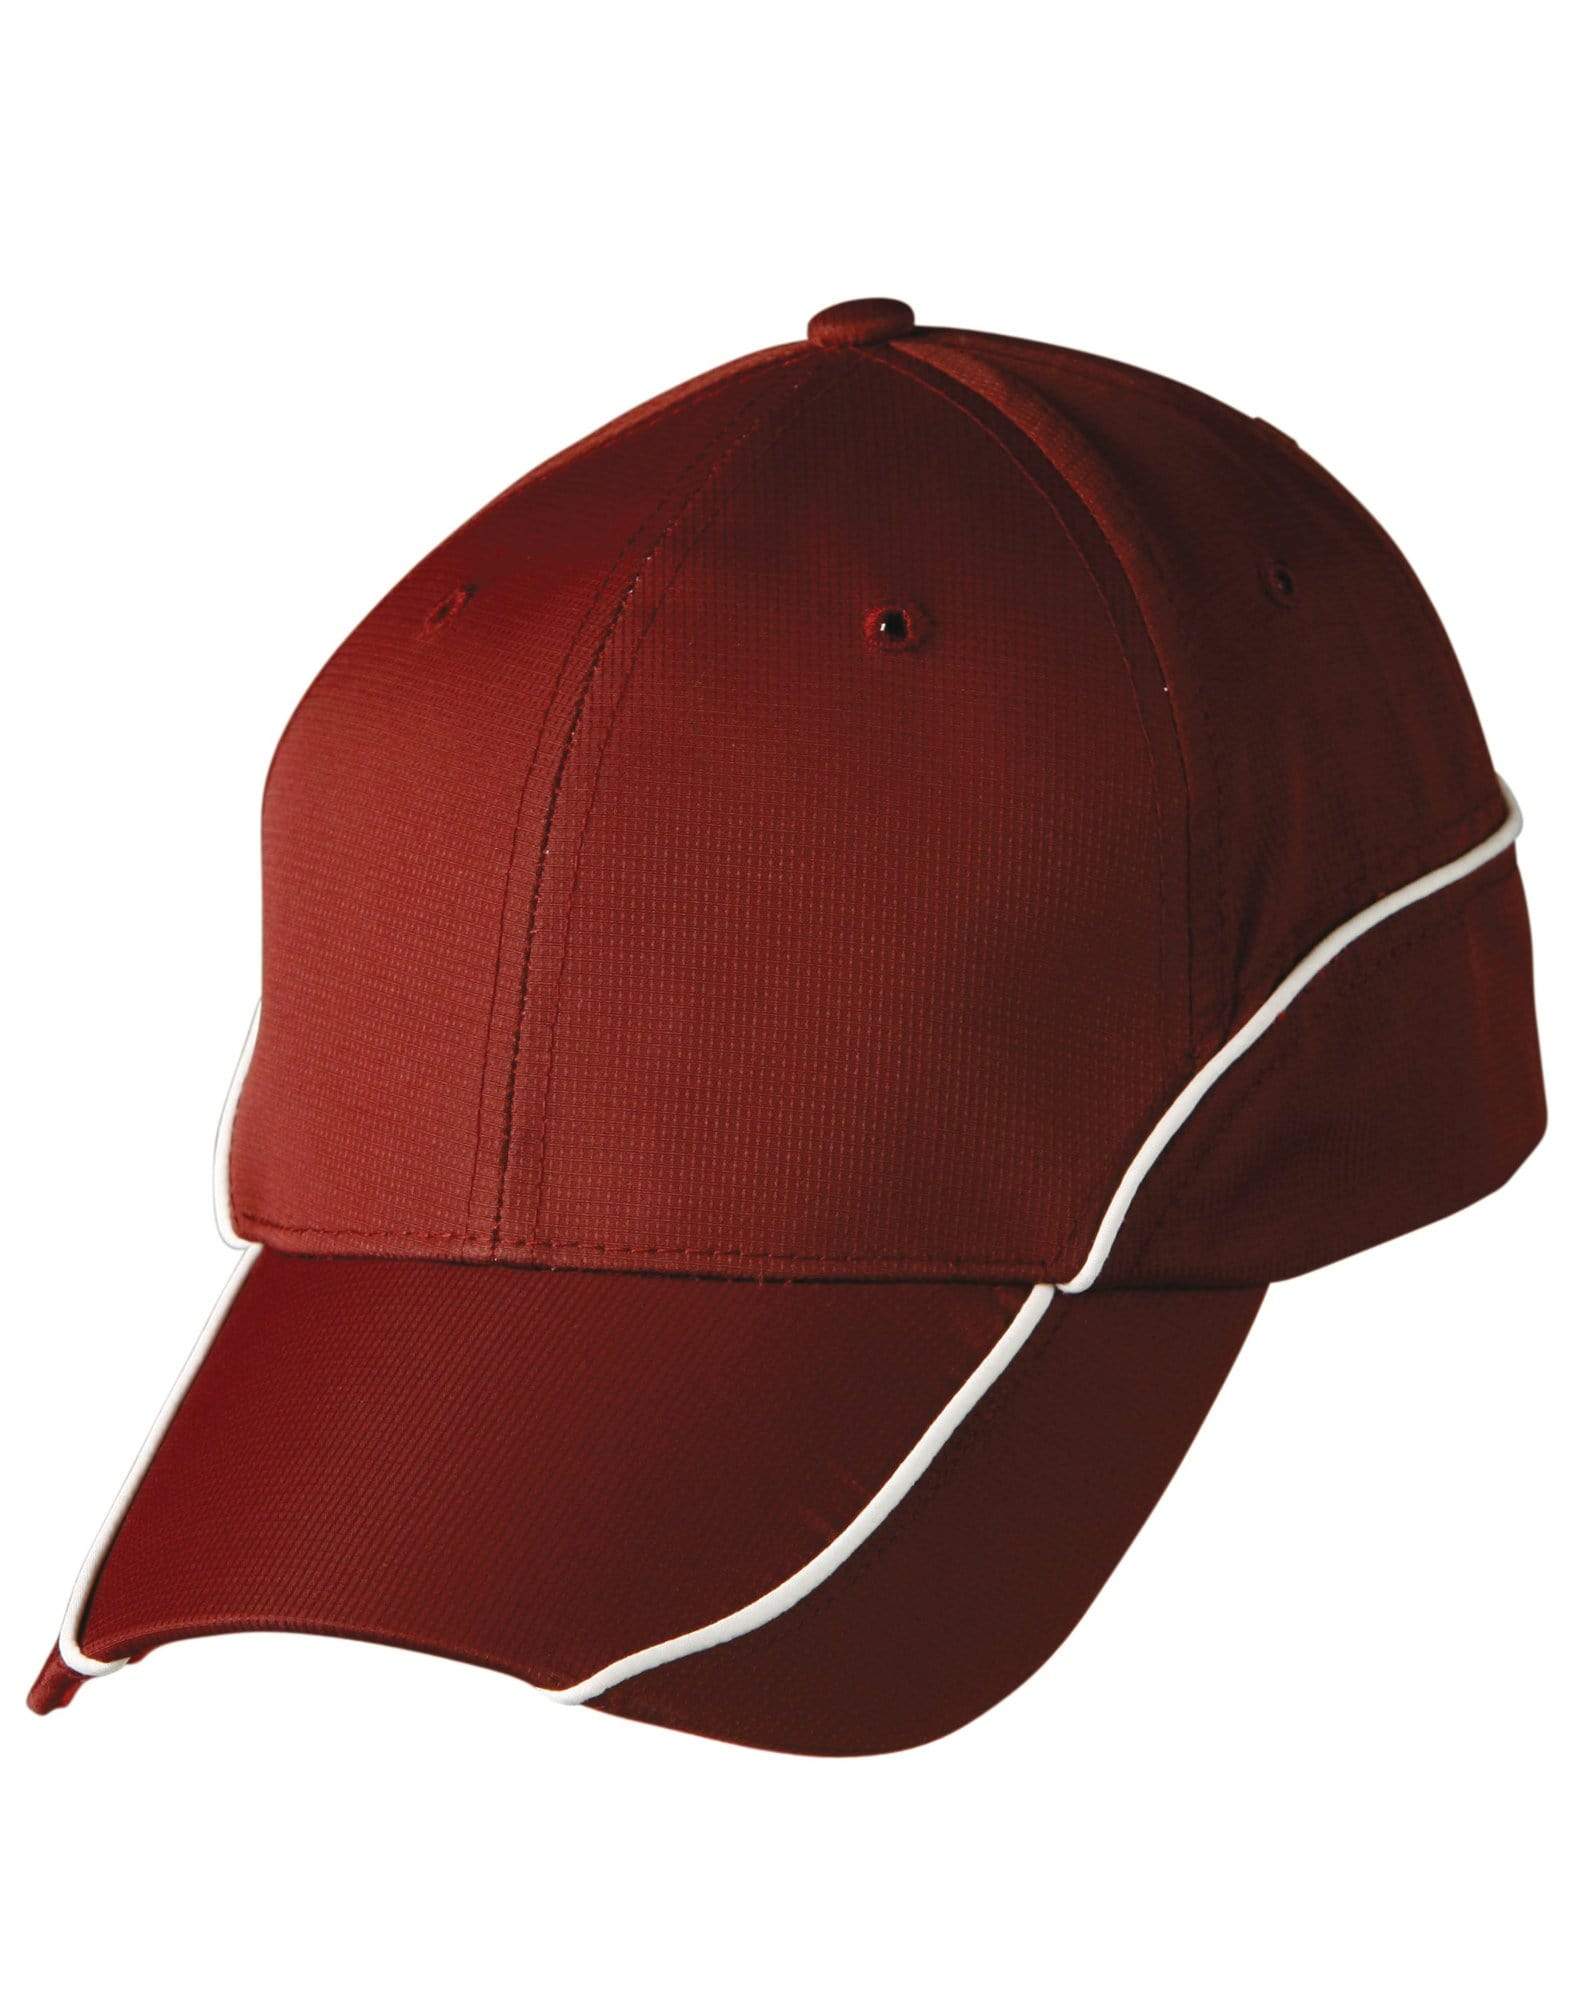 Winning Spirit Active Wear Maroon/White / One size fits most Contrast Lining Cap Ch21